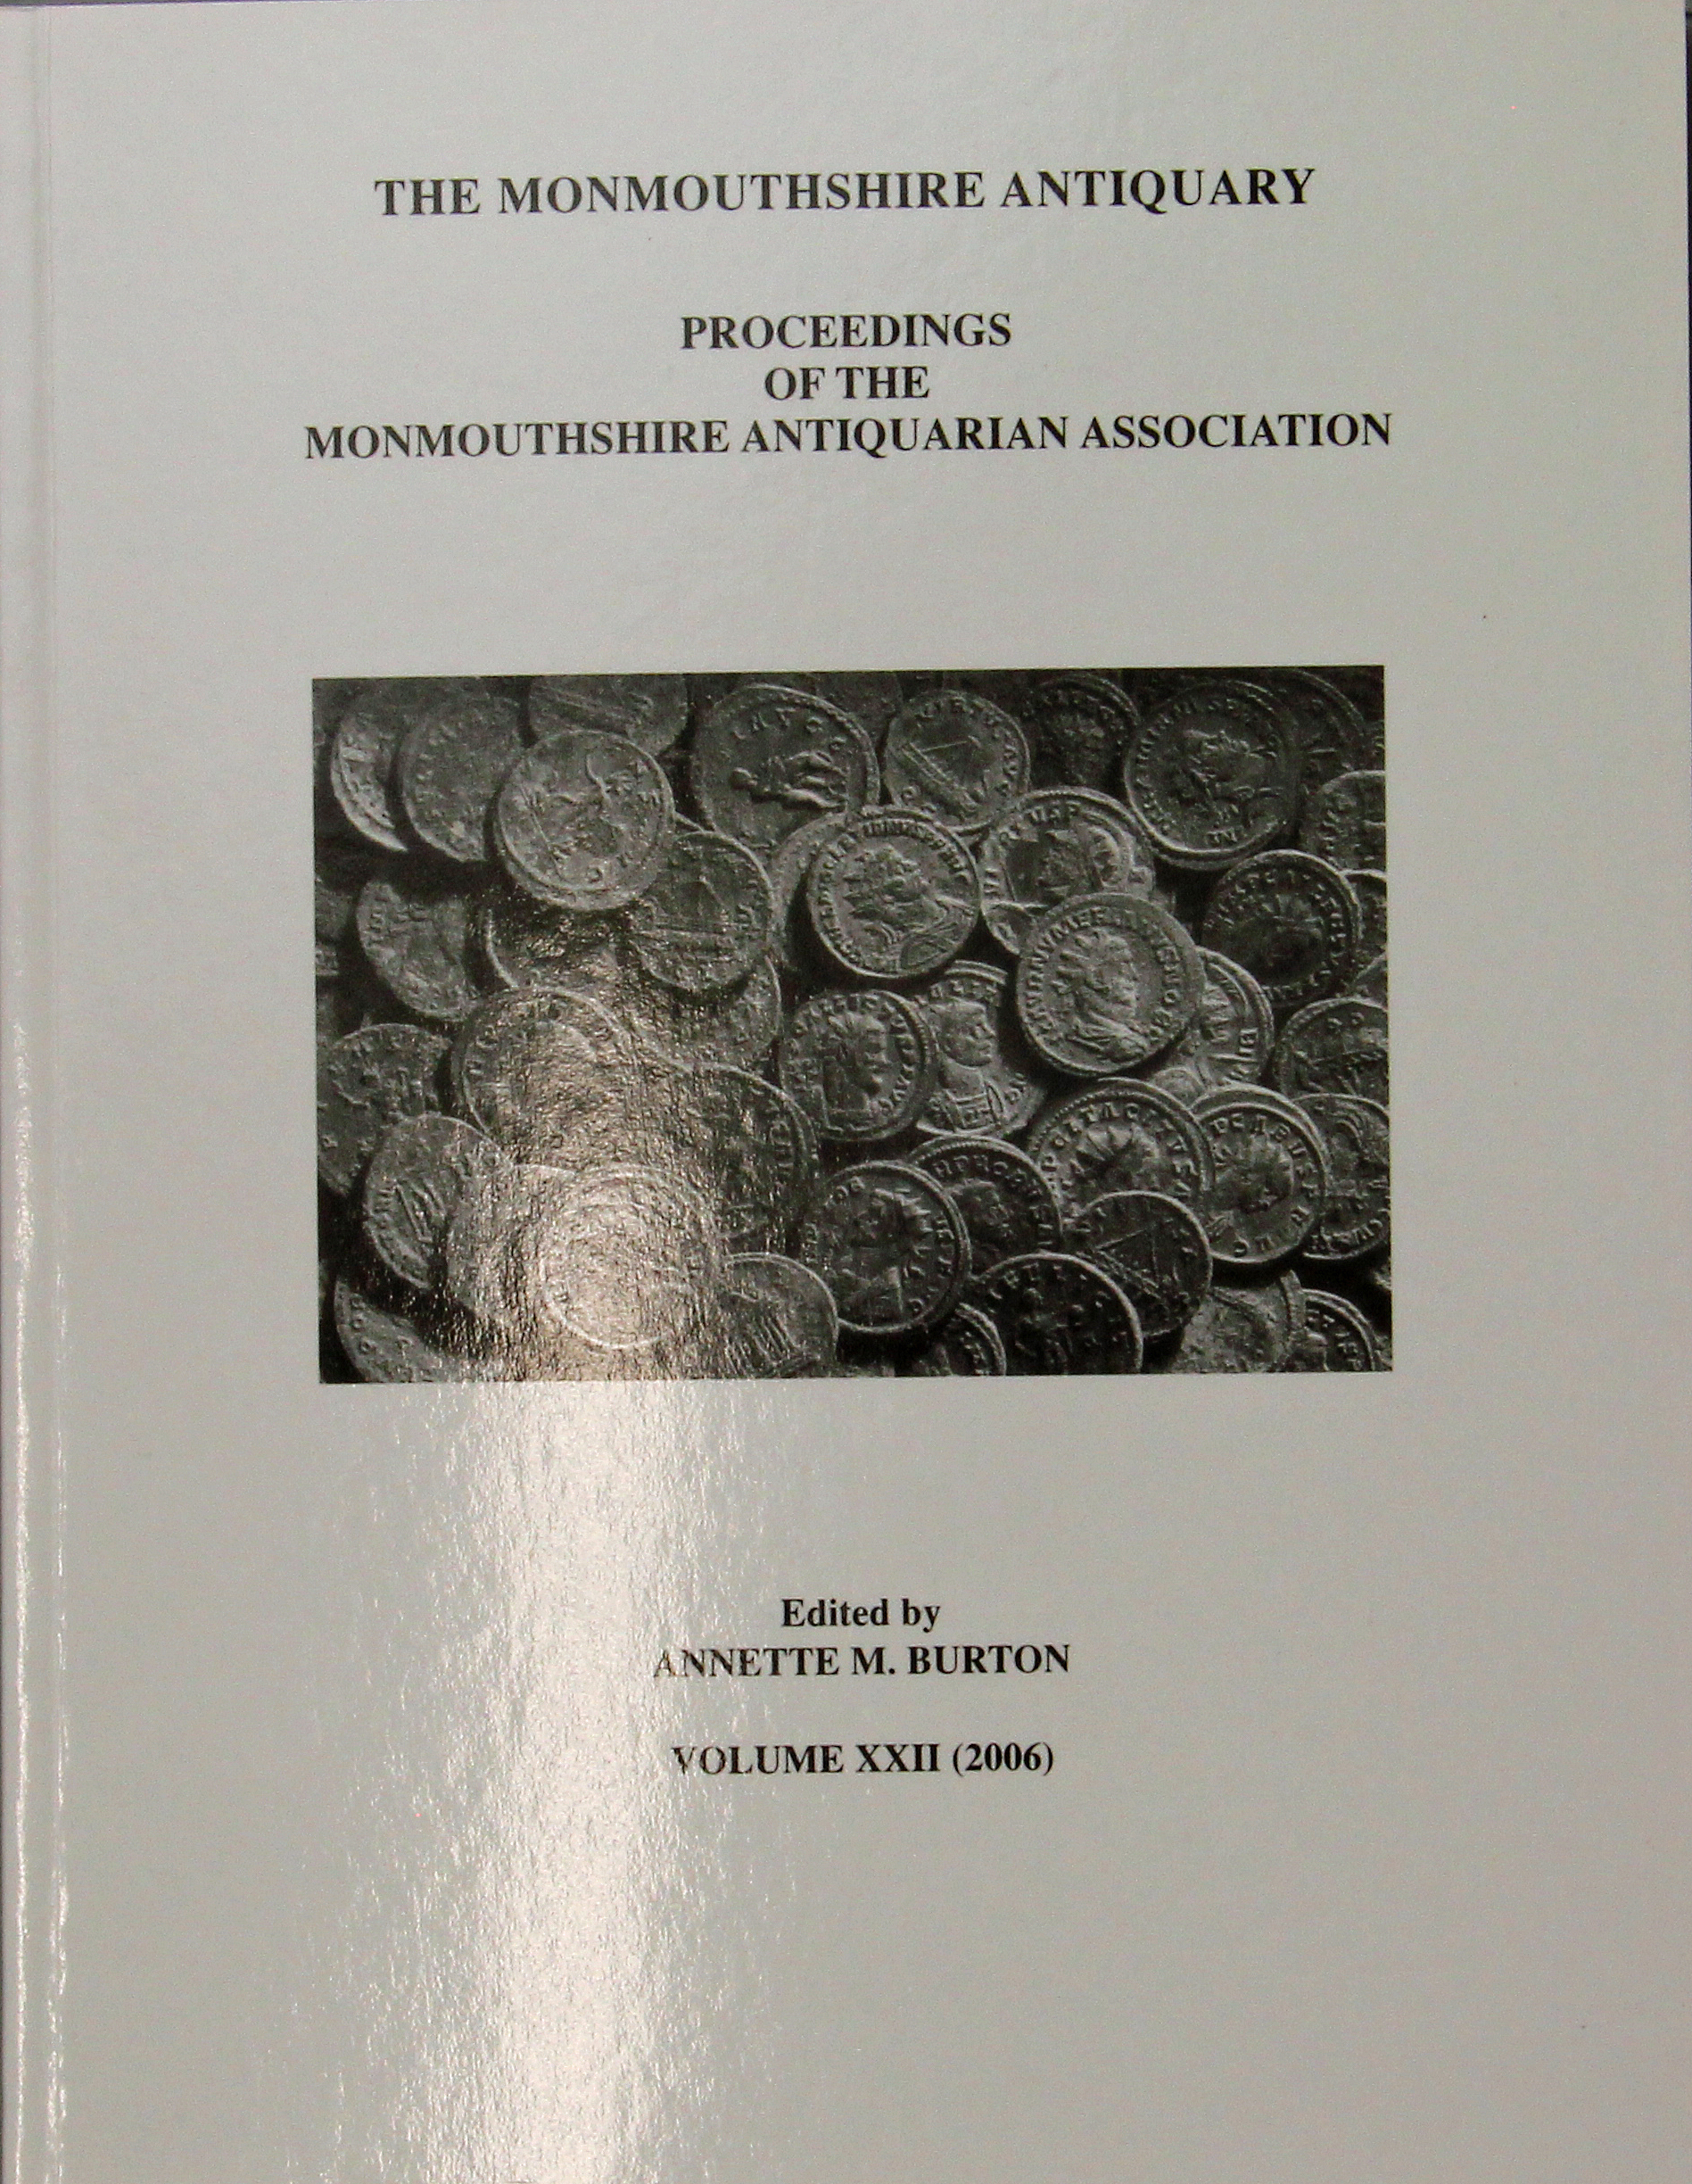 The Monmouthshire Antiquary Volume 22, 2006, Free (Donation of at least £2.00 to cover postage)